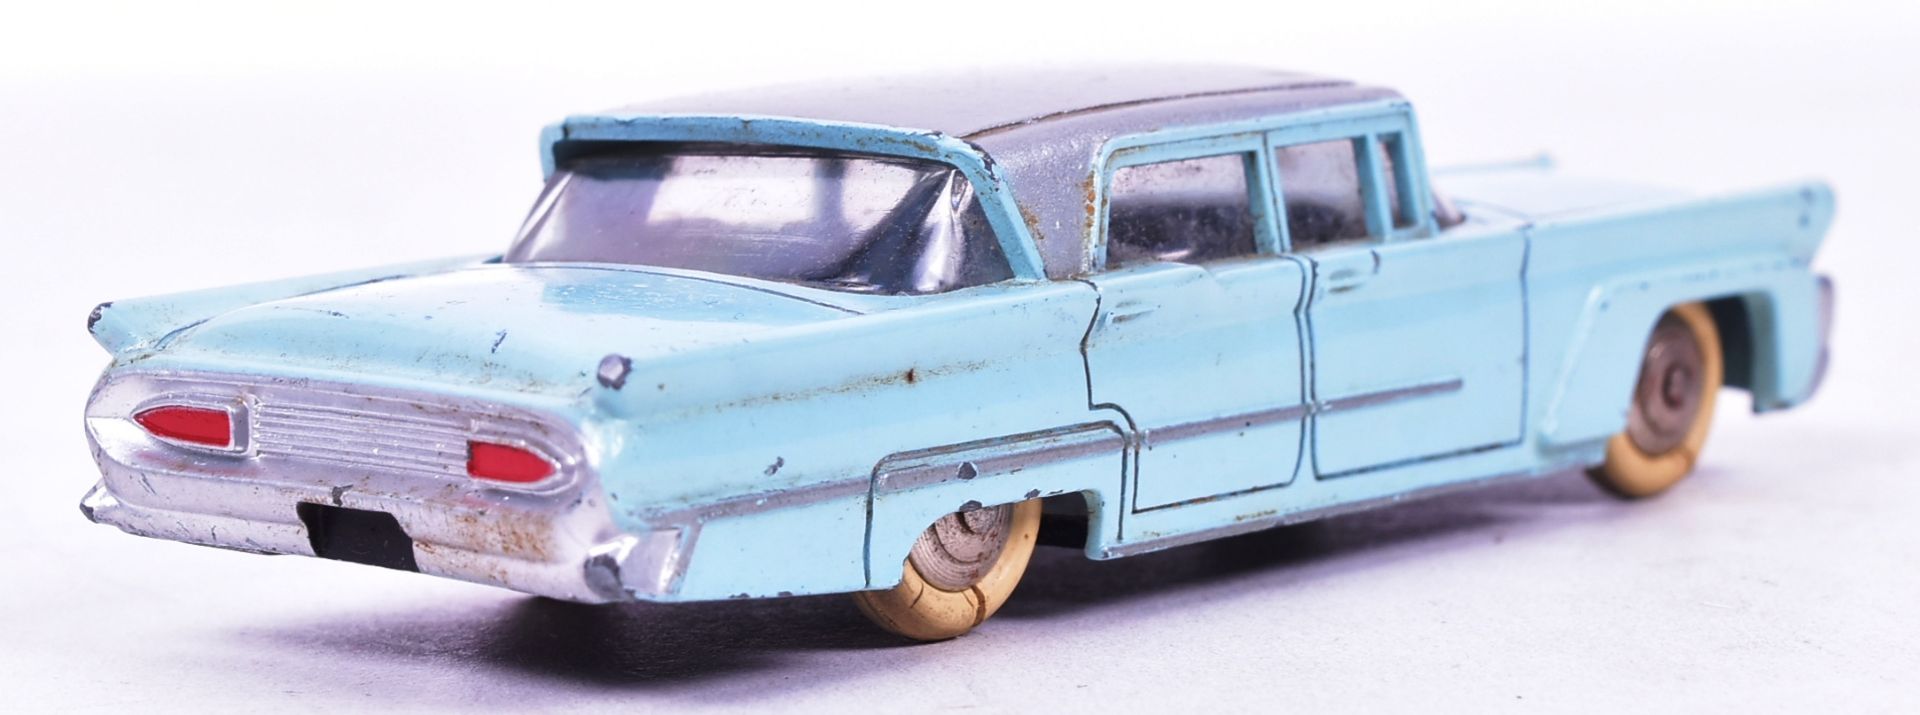 DIECAST - FRENCH DINKY TOYS - LINCOLN PREMIERE - Image 4 of 5